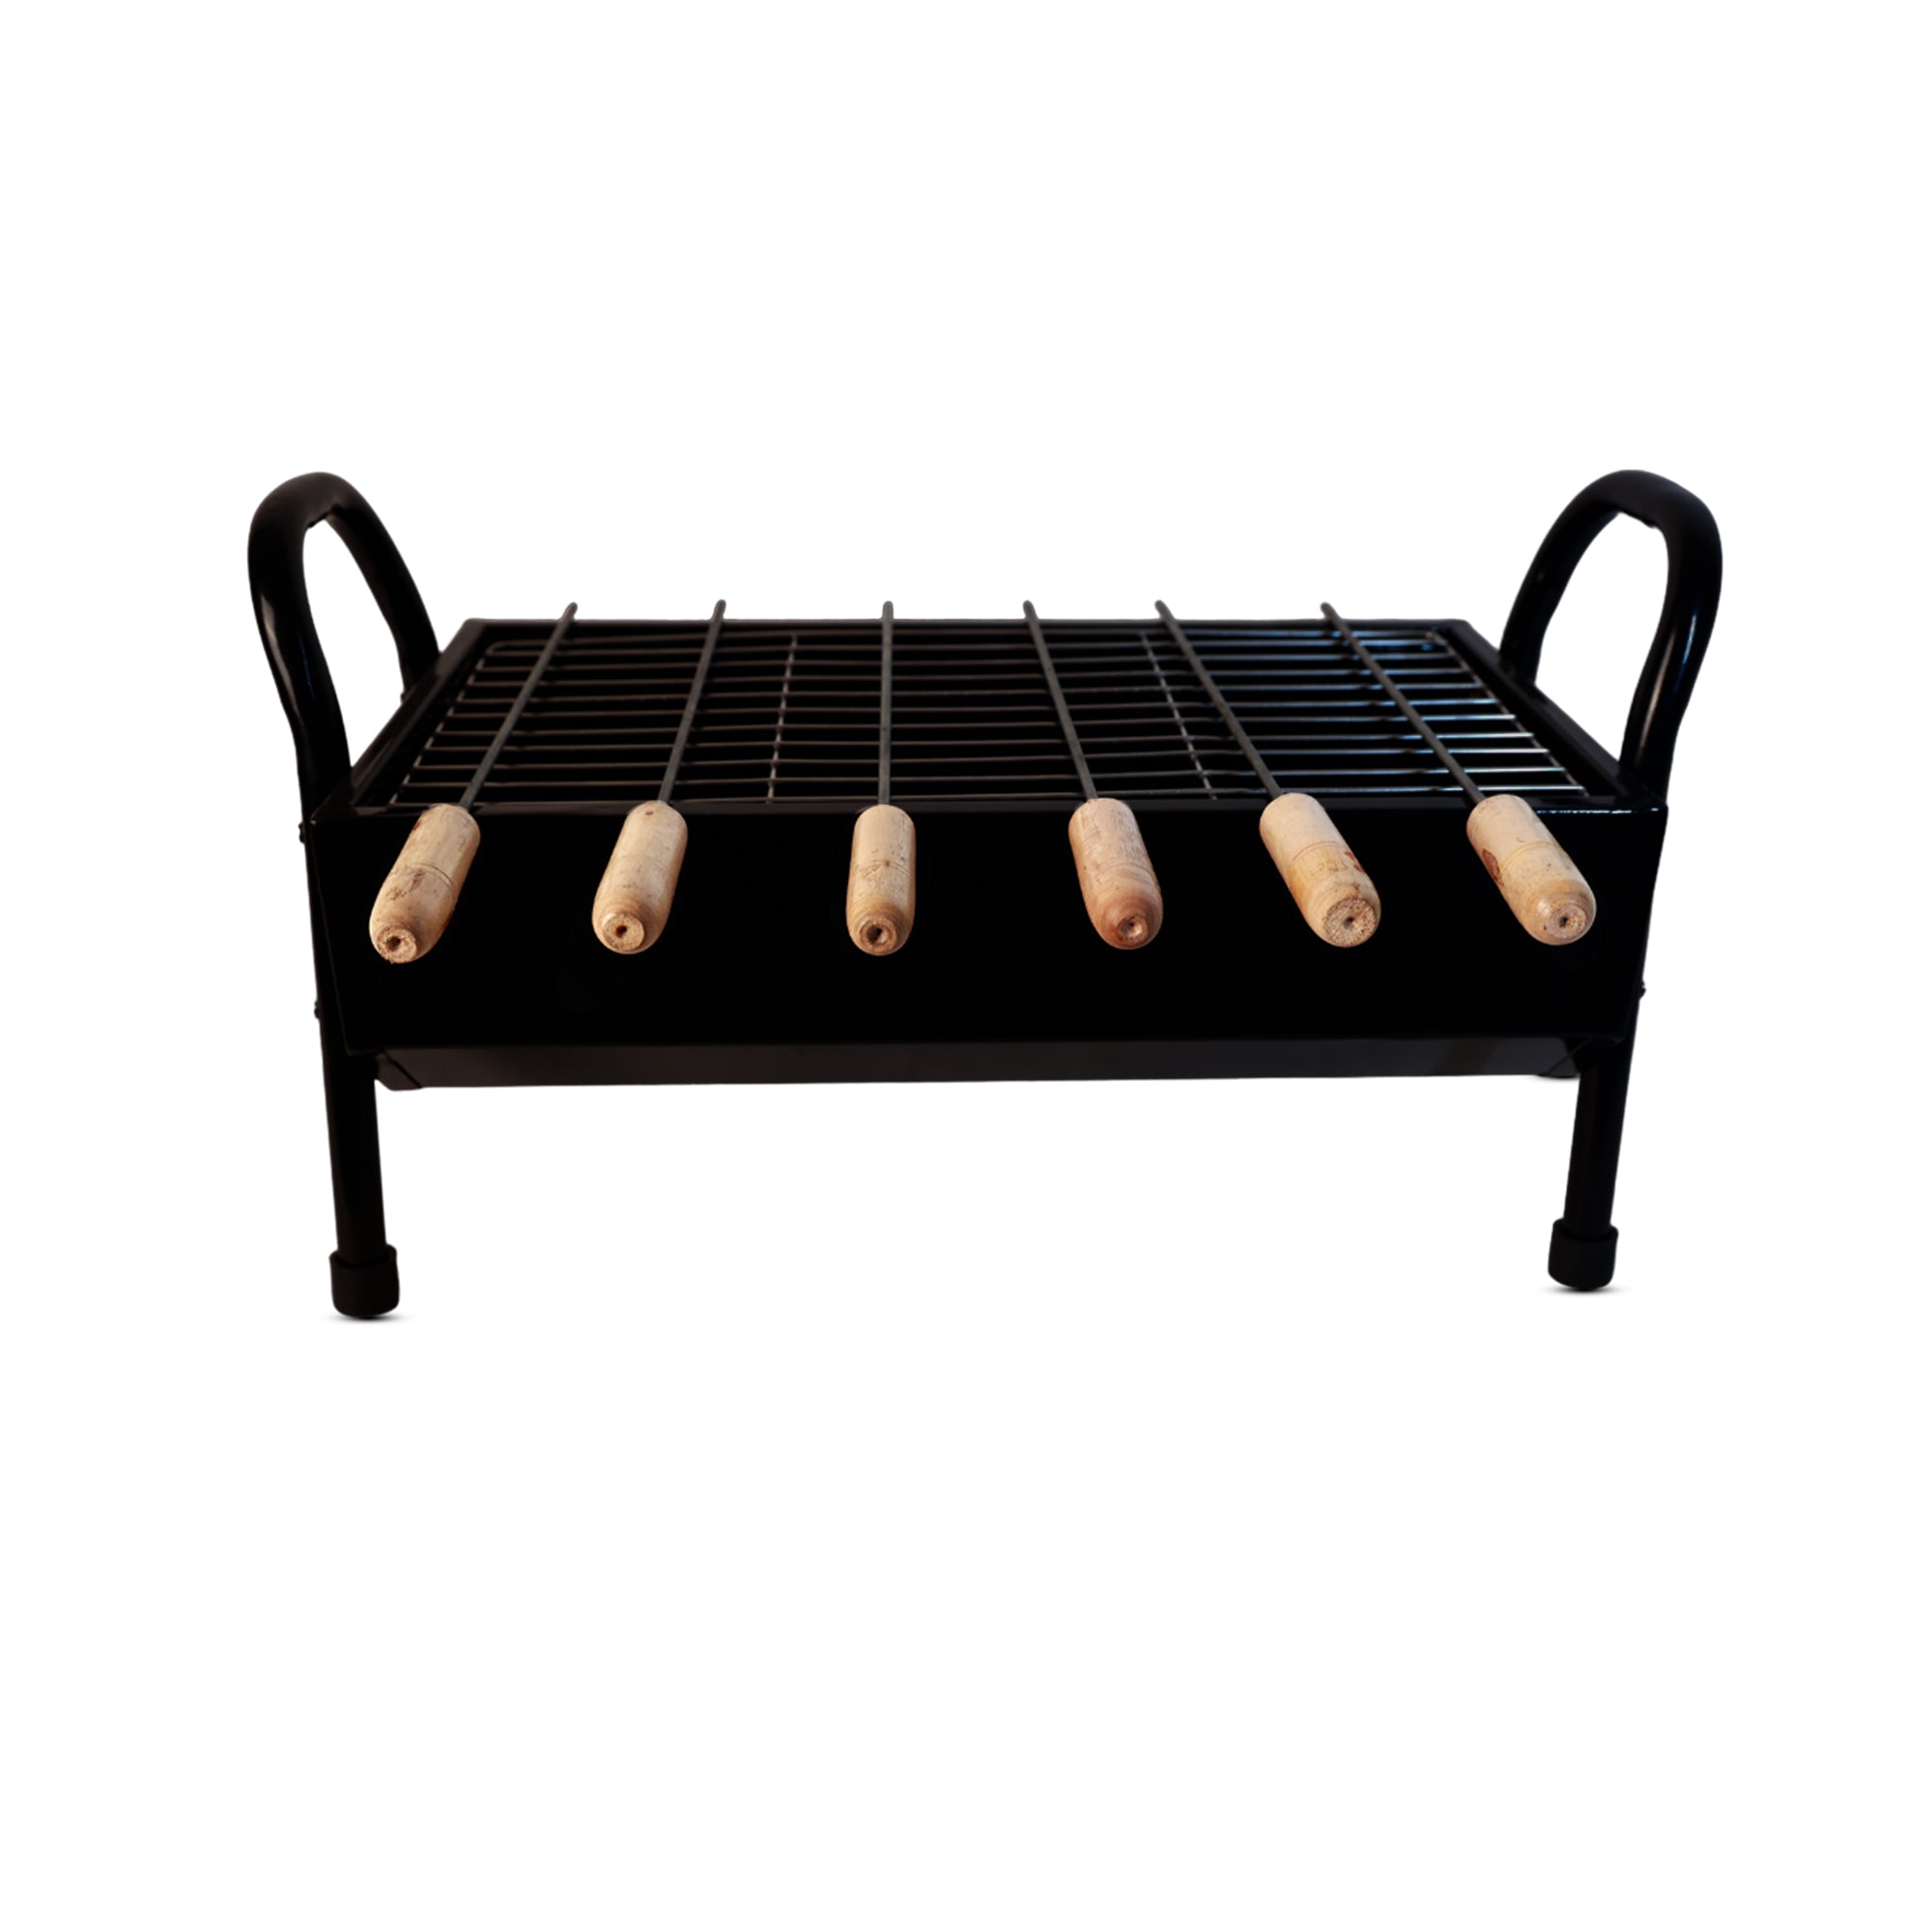 Barbecue Grill, Charcoal Grill Folding Portable Lightweight Barbecue Grill Tools for Outdoor With 5 Skewers, Free Standing